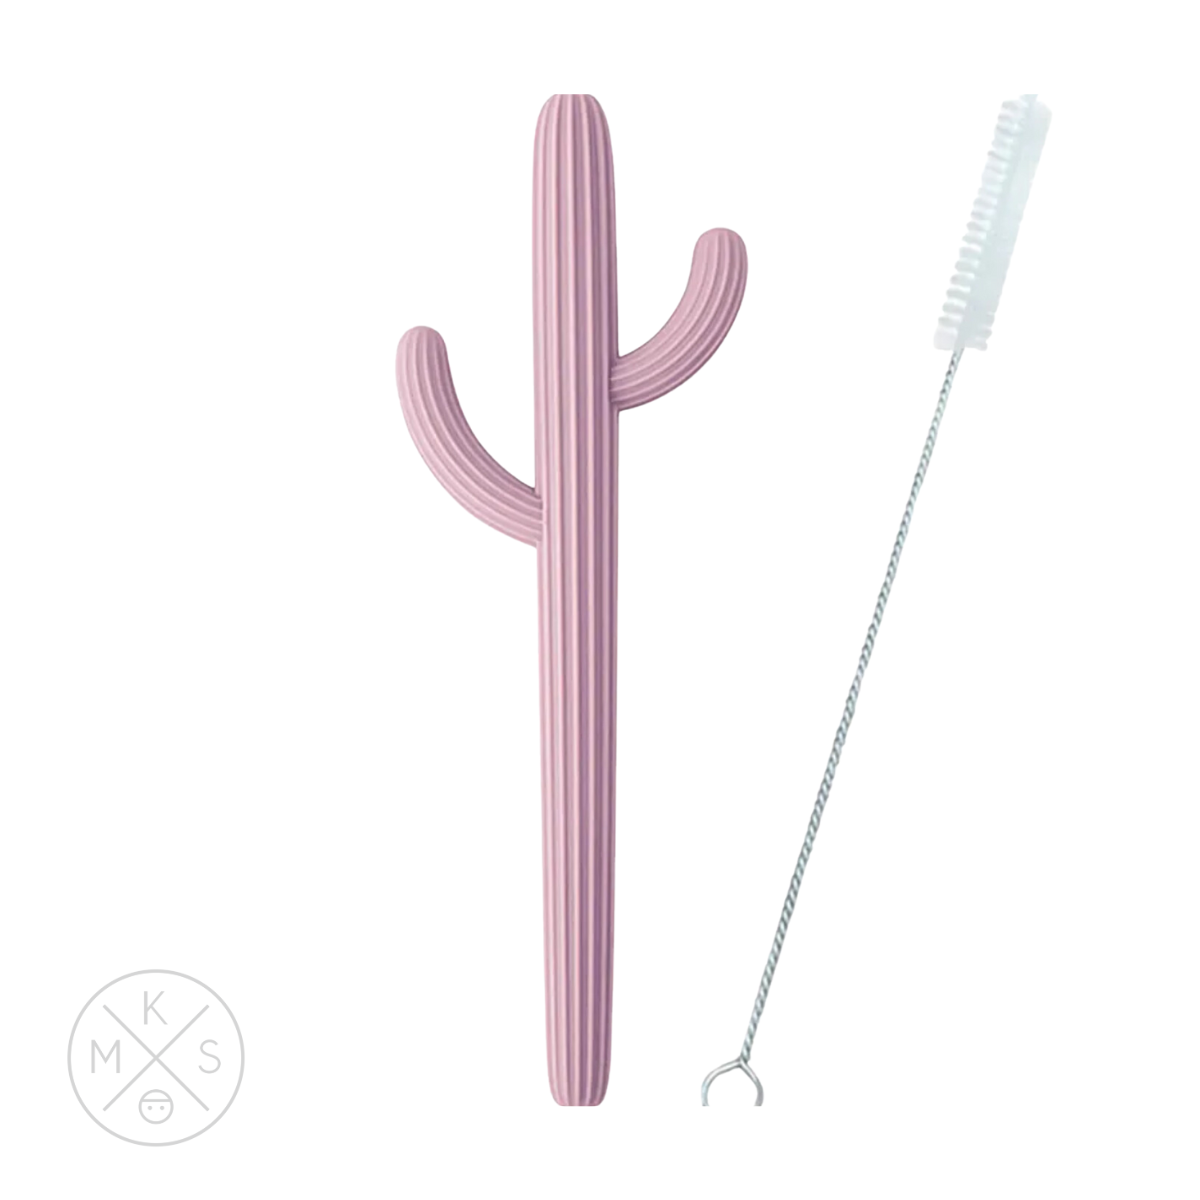 Cactus Silicone Teether & Straw for kids and adults